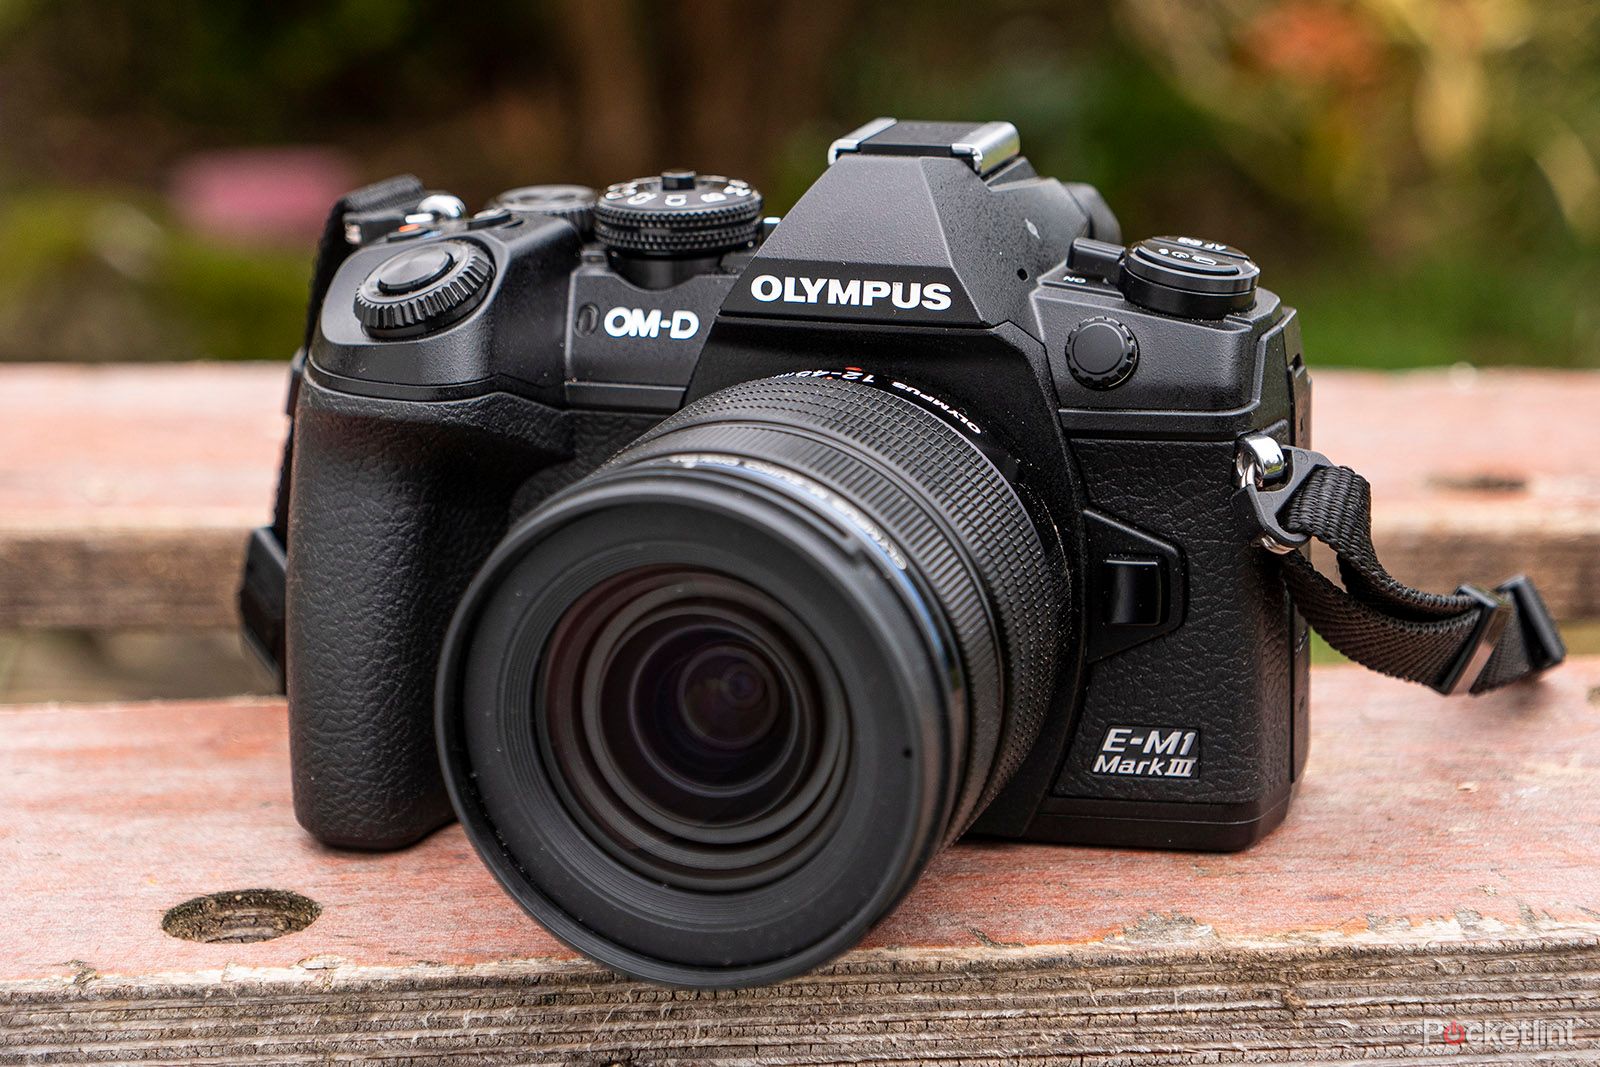 Leed Hoge blootstelling vrachtauto Olympus OM-D E-M1 Mk3 review: Technological powerhouse